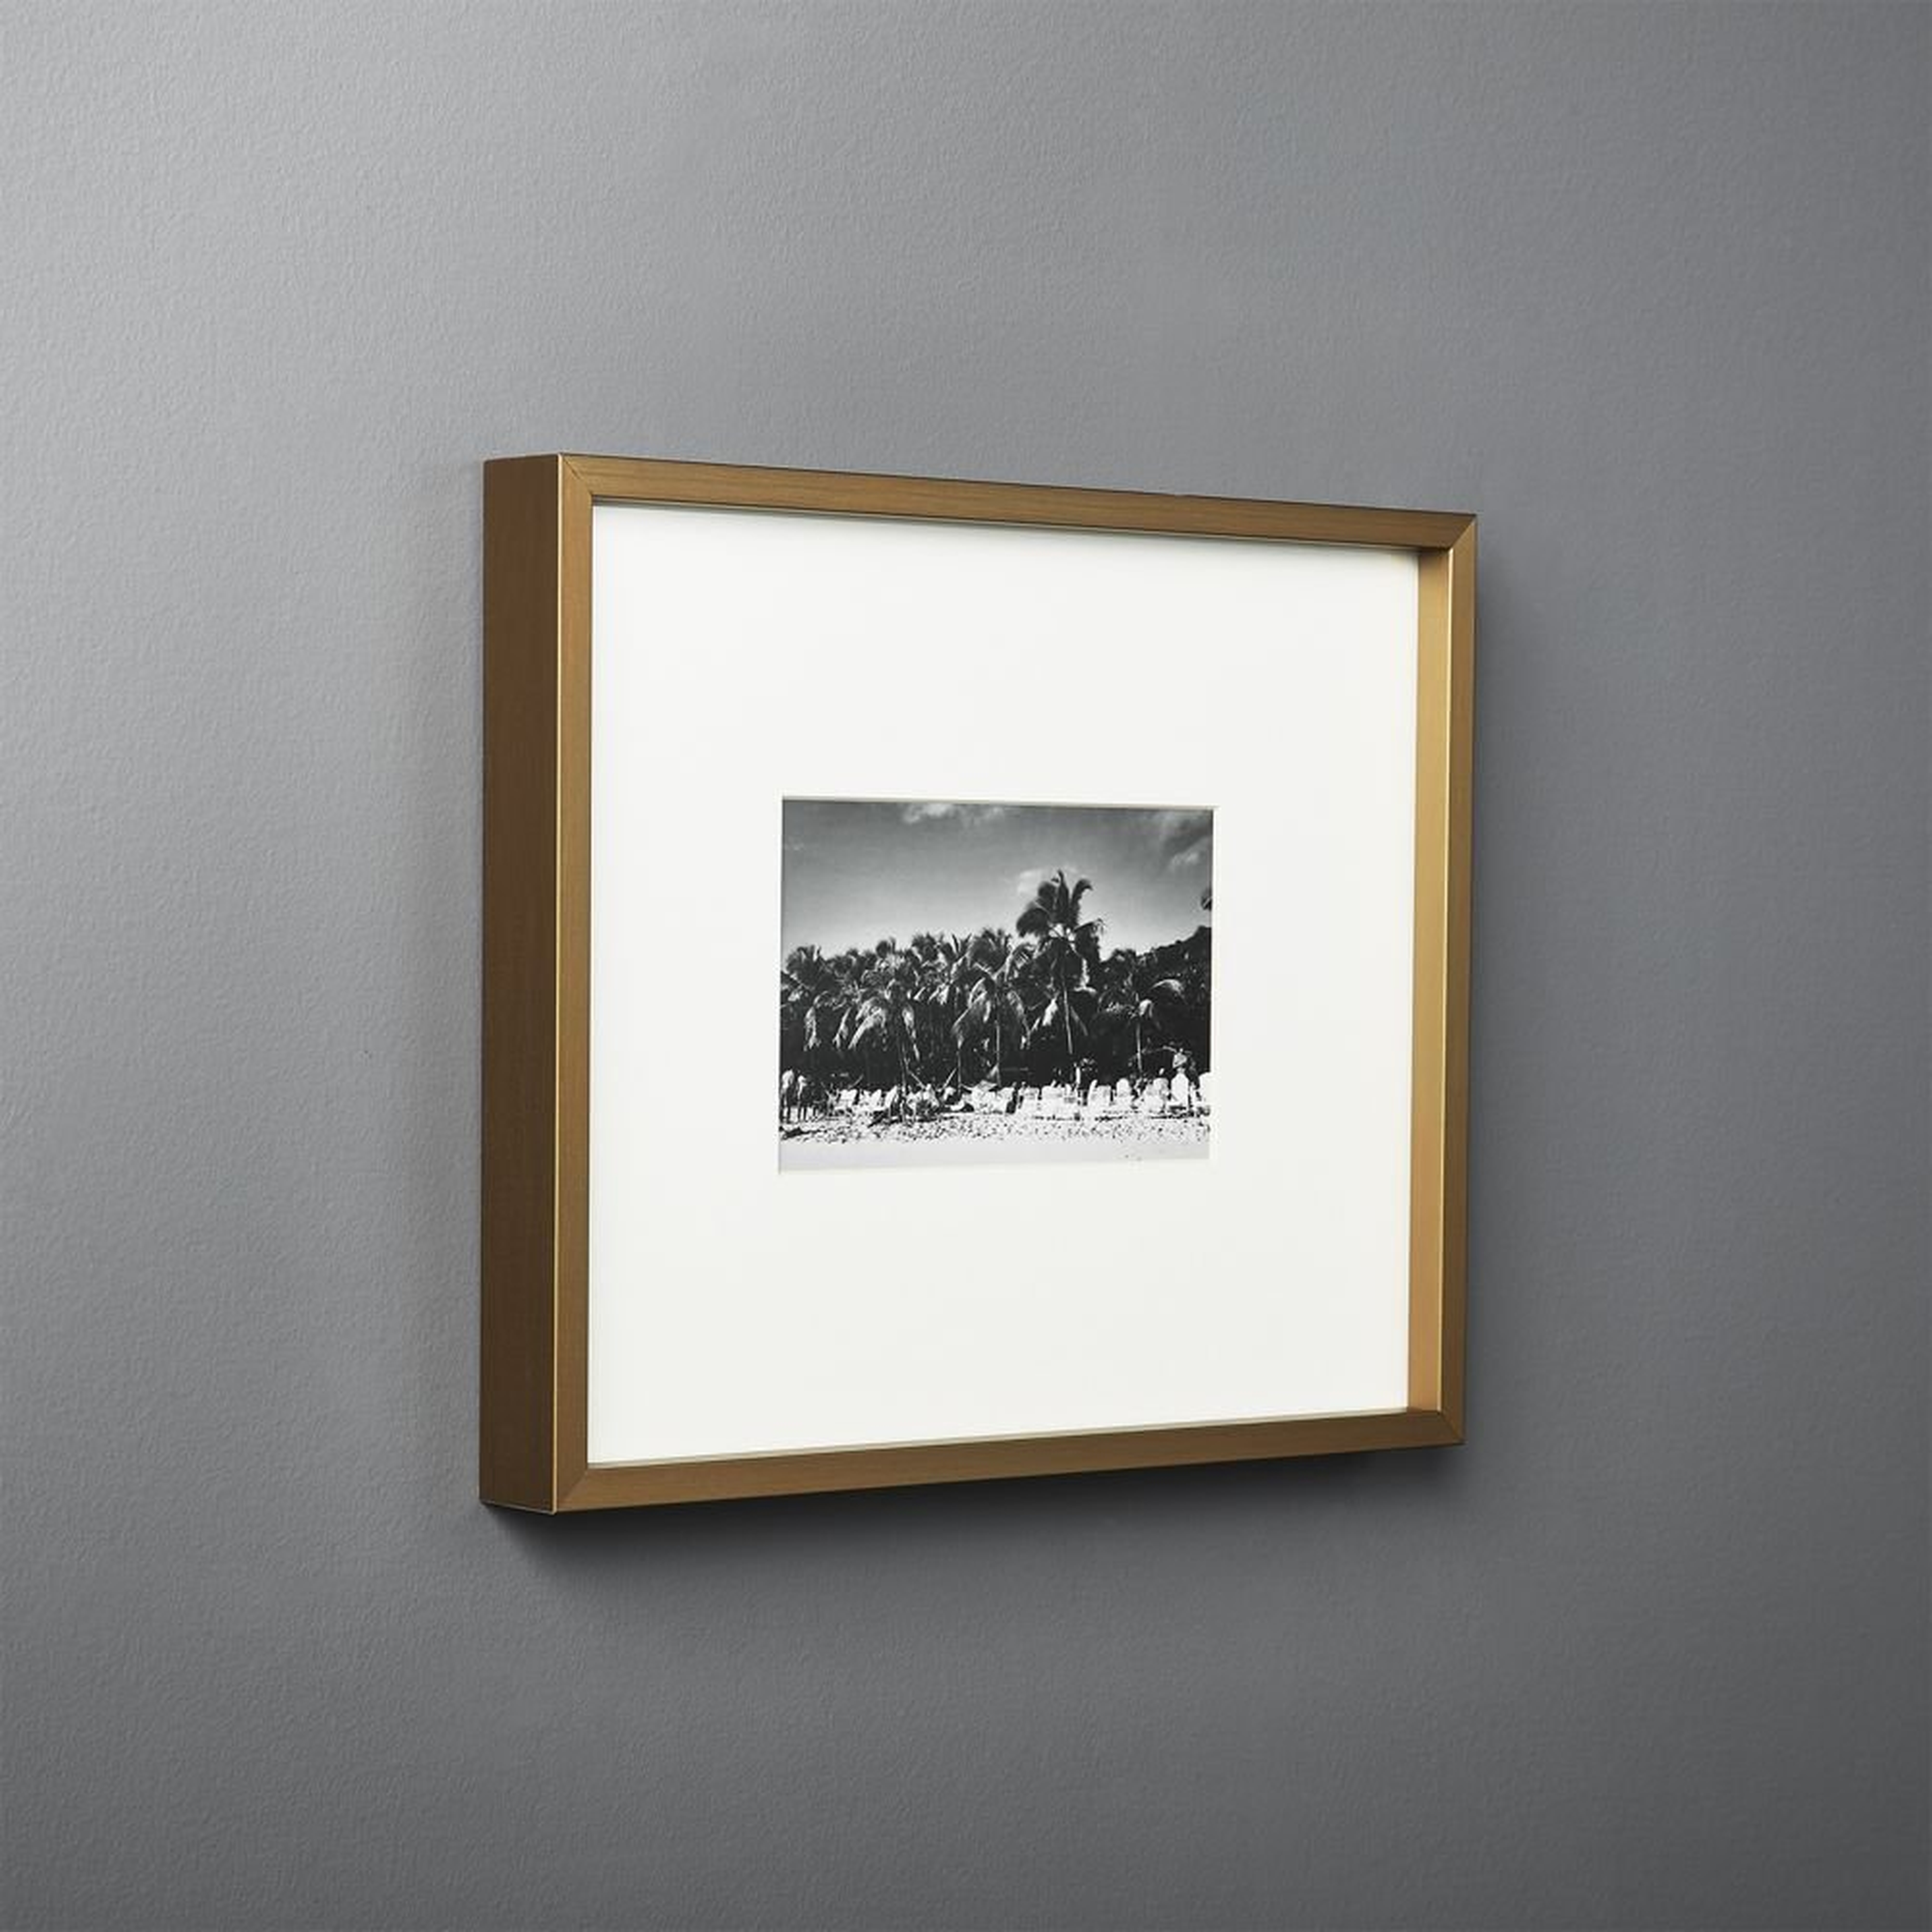 Gallery Brass Frame with White Mat 4x6 - CB2